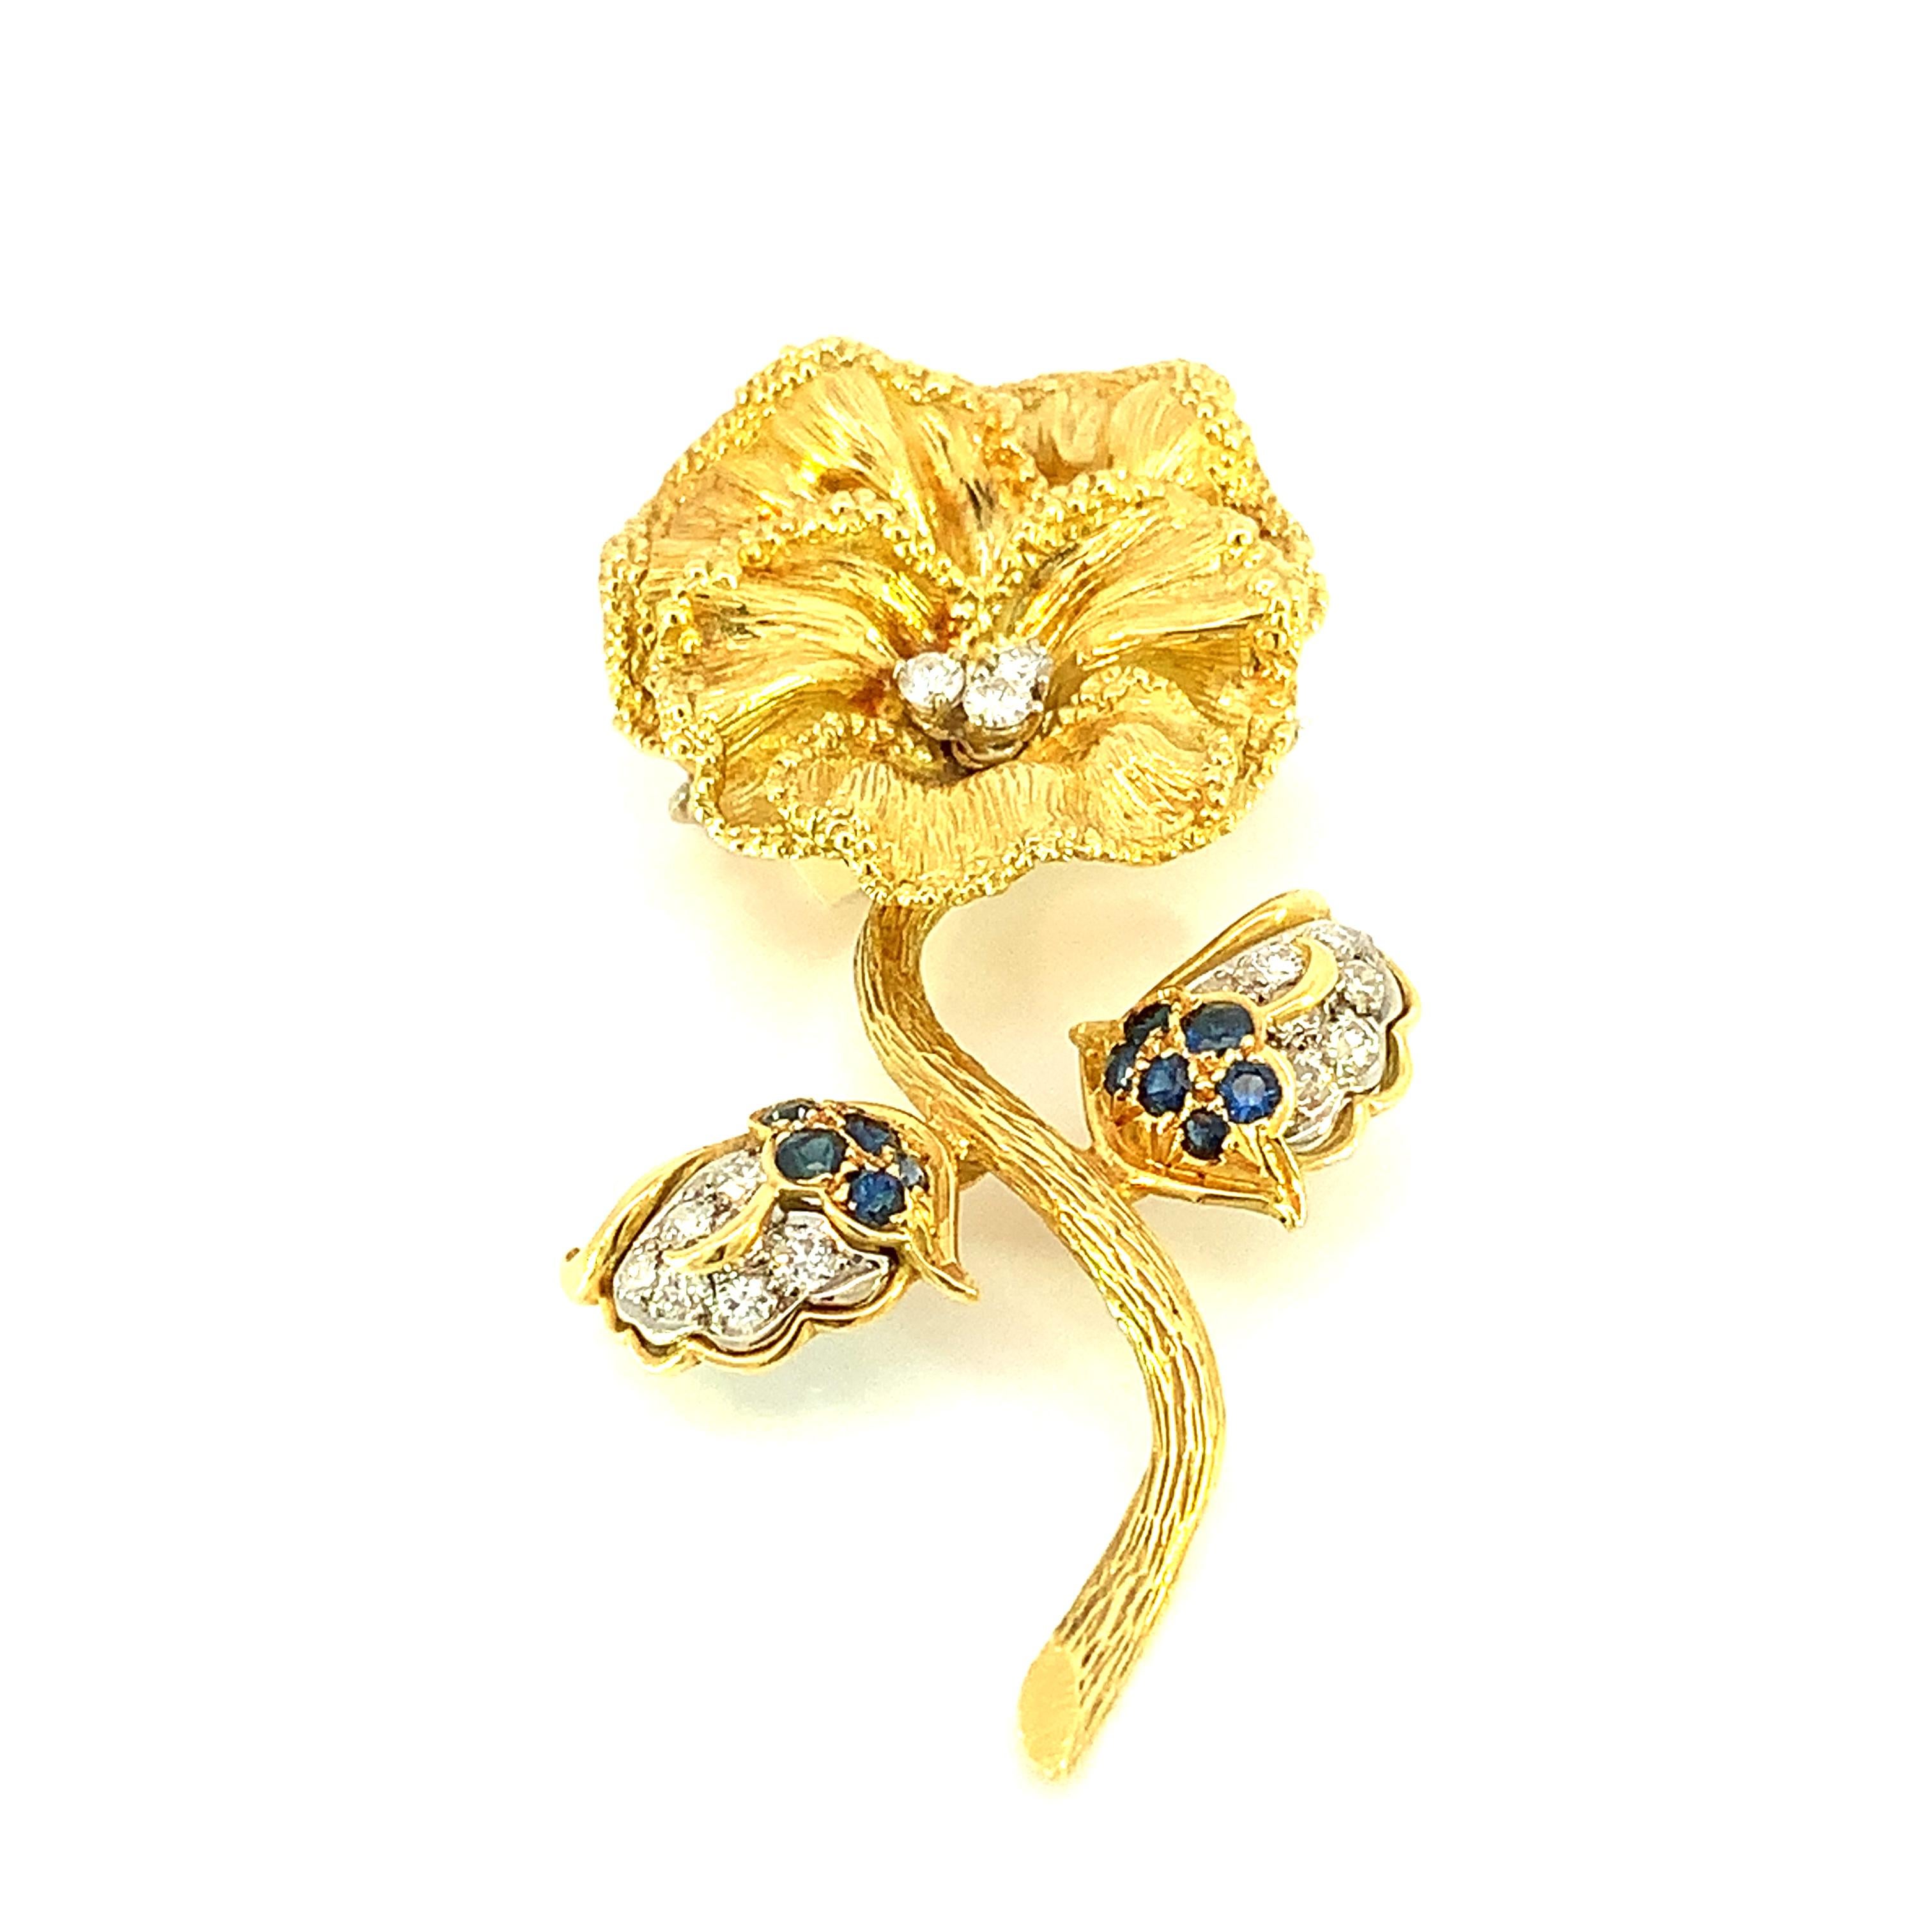 Introducing our exquisite Blue Sapphire and Diamond Flower Pin, a finely crafted piece of jewelry that marries the timeless elegance of blue sapphires with the brilliance of diamonds, all set in lustrous 18K yellow gold. This flower pin is a true